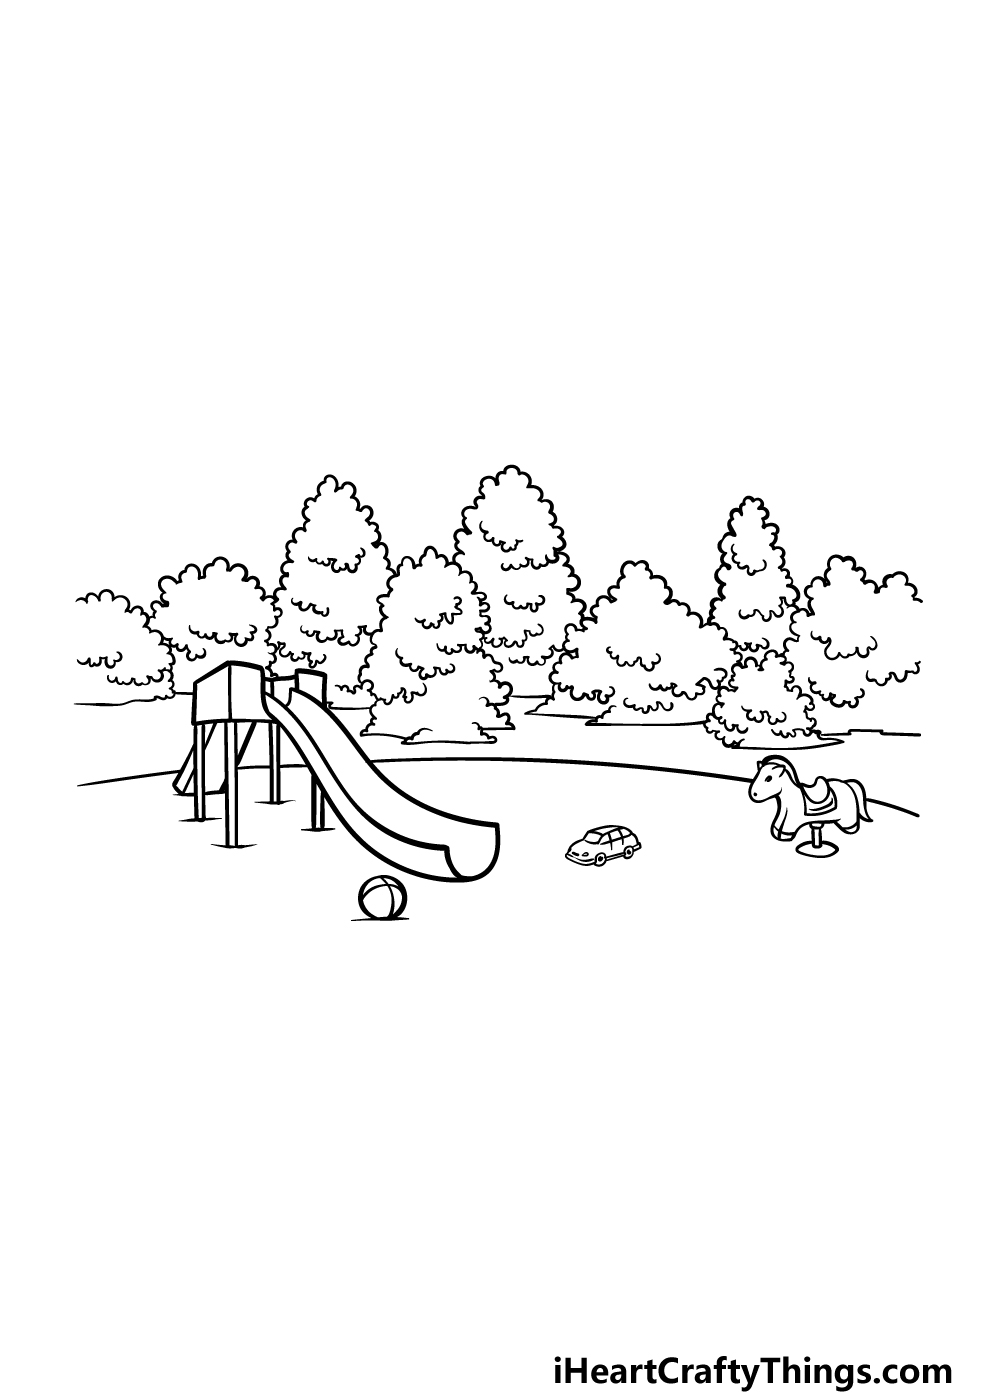 Playground Coloring Page | Easy Drawing Guides